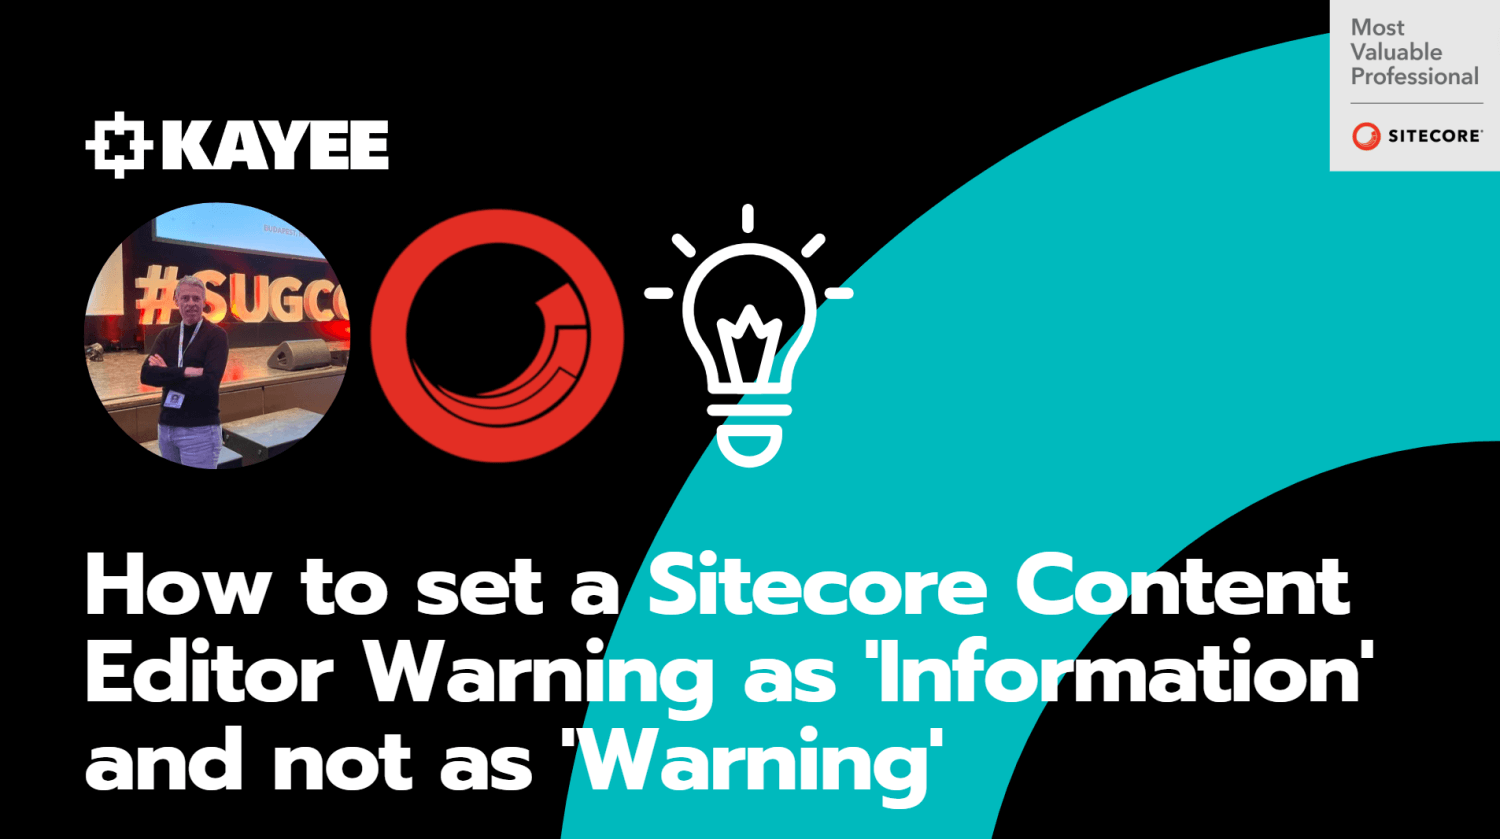 How to set a Sitecore Content Editor Warning as 'Information' and not as 'Warning'